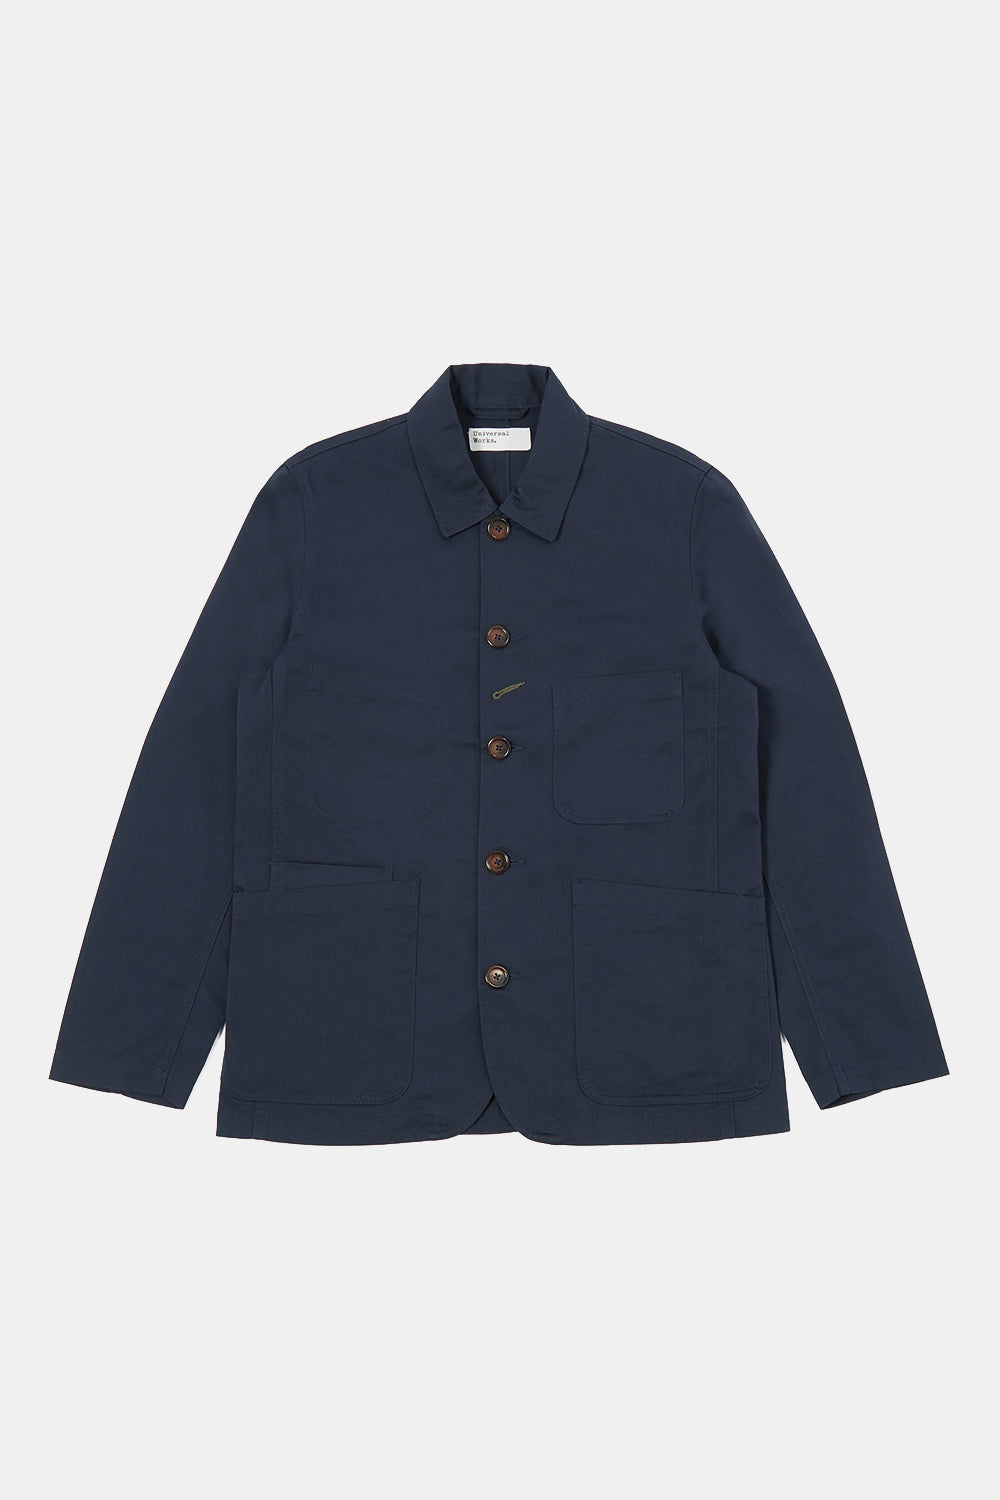 Universal Works Bakers Twill Jacket (Navy)
